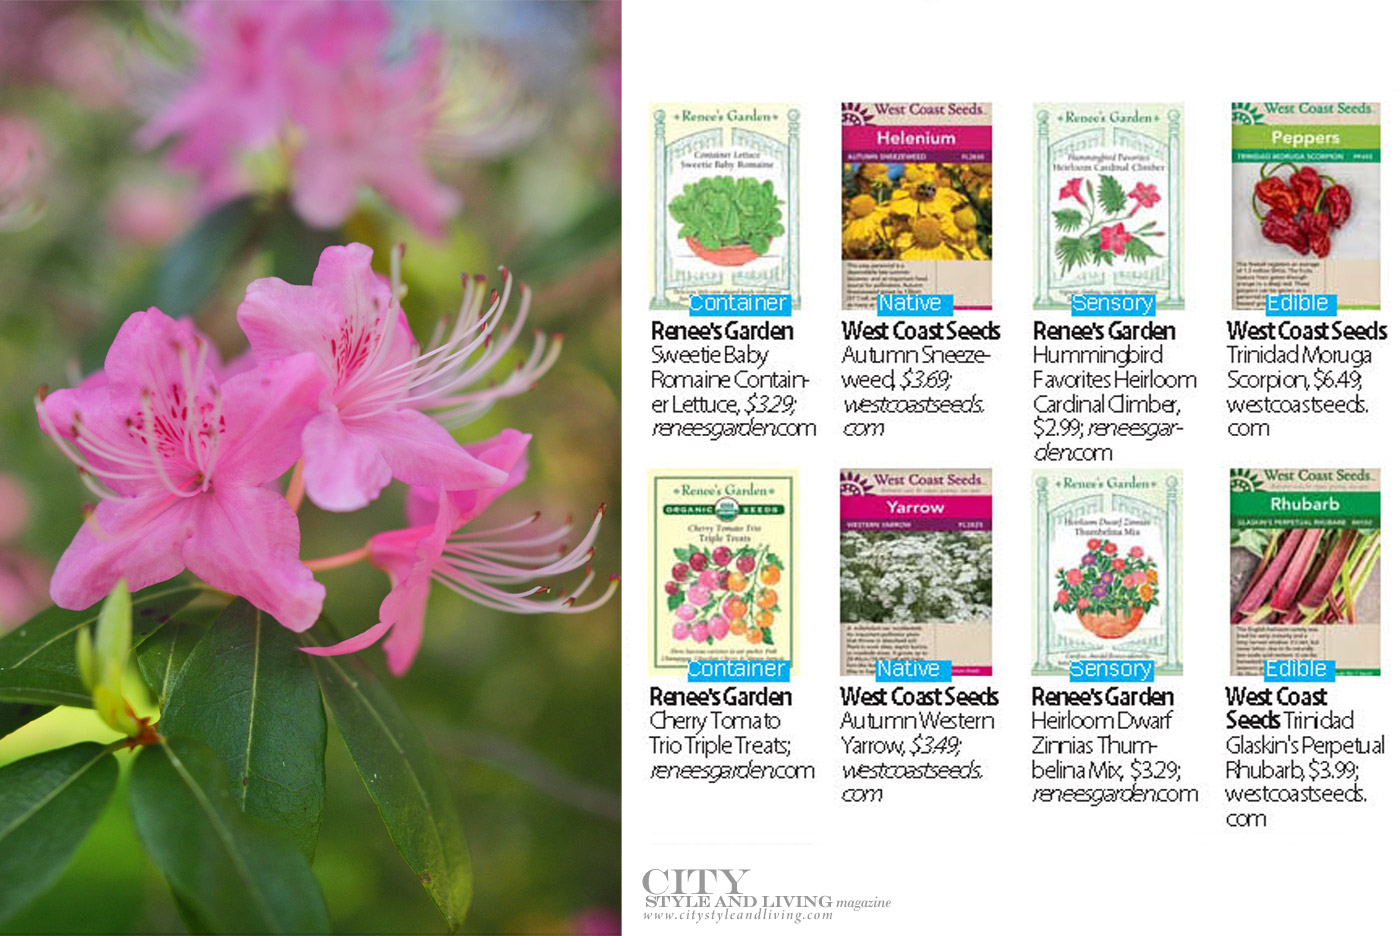 City Style and Living Summer 2023 Backyard Bliss and What to Plant Now Seeds